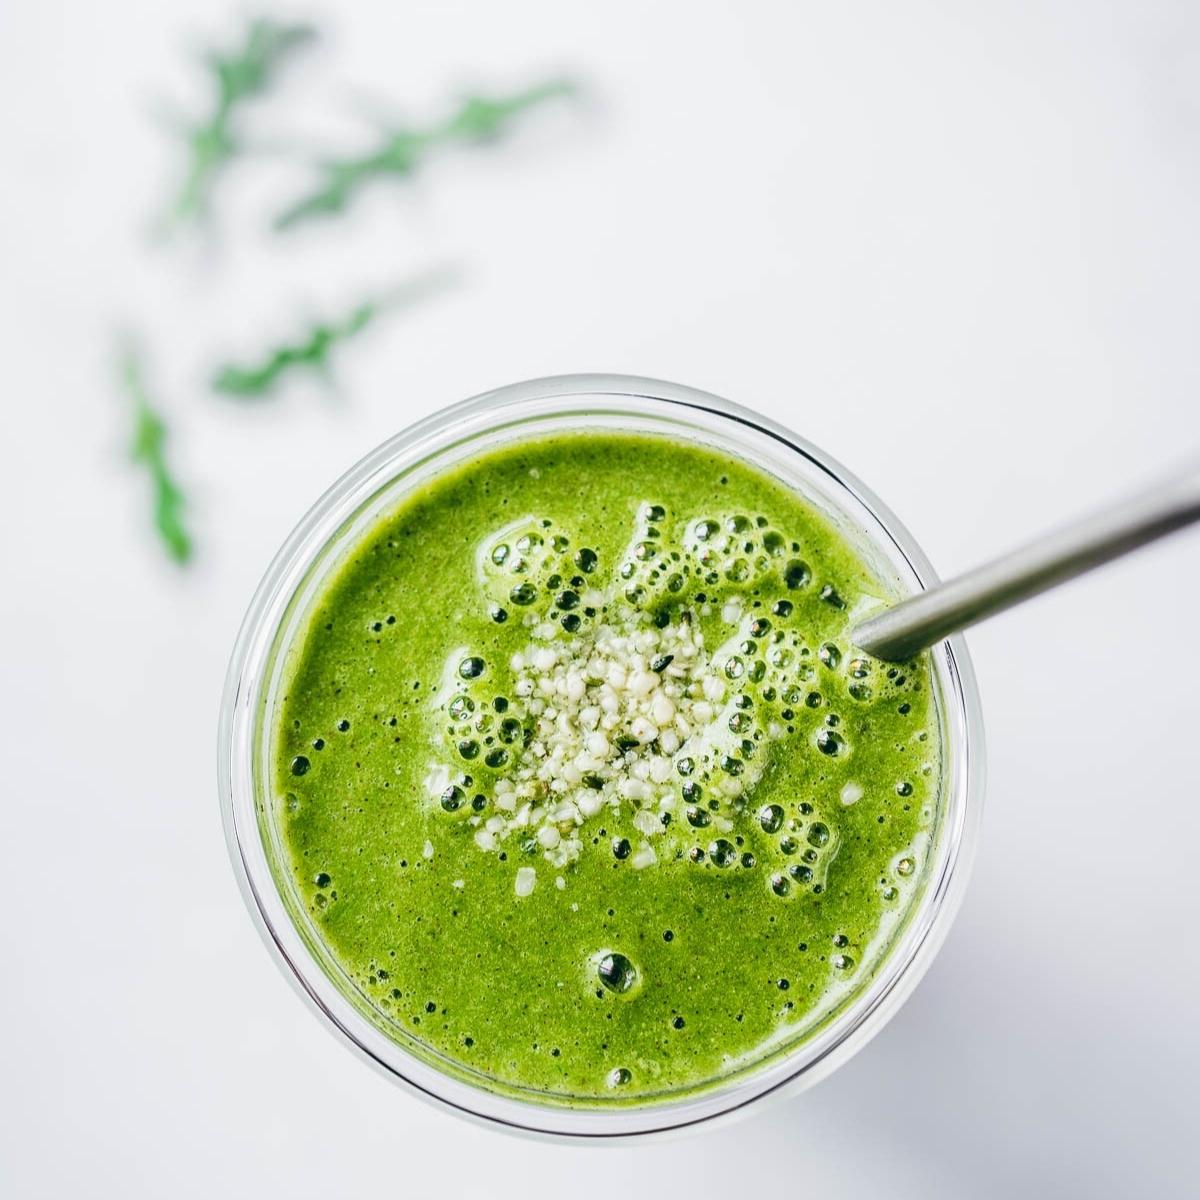 top view of a bright green smoothie in a clear glass topped with a sprinkle of hemp seeds.